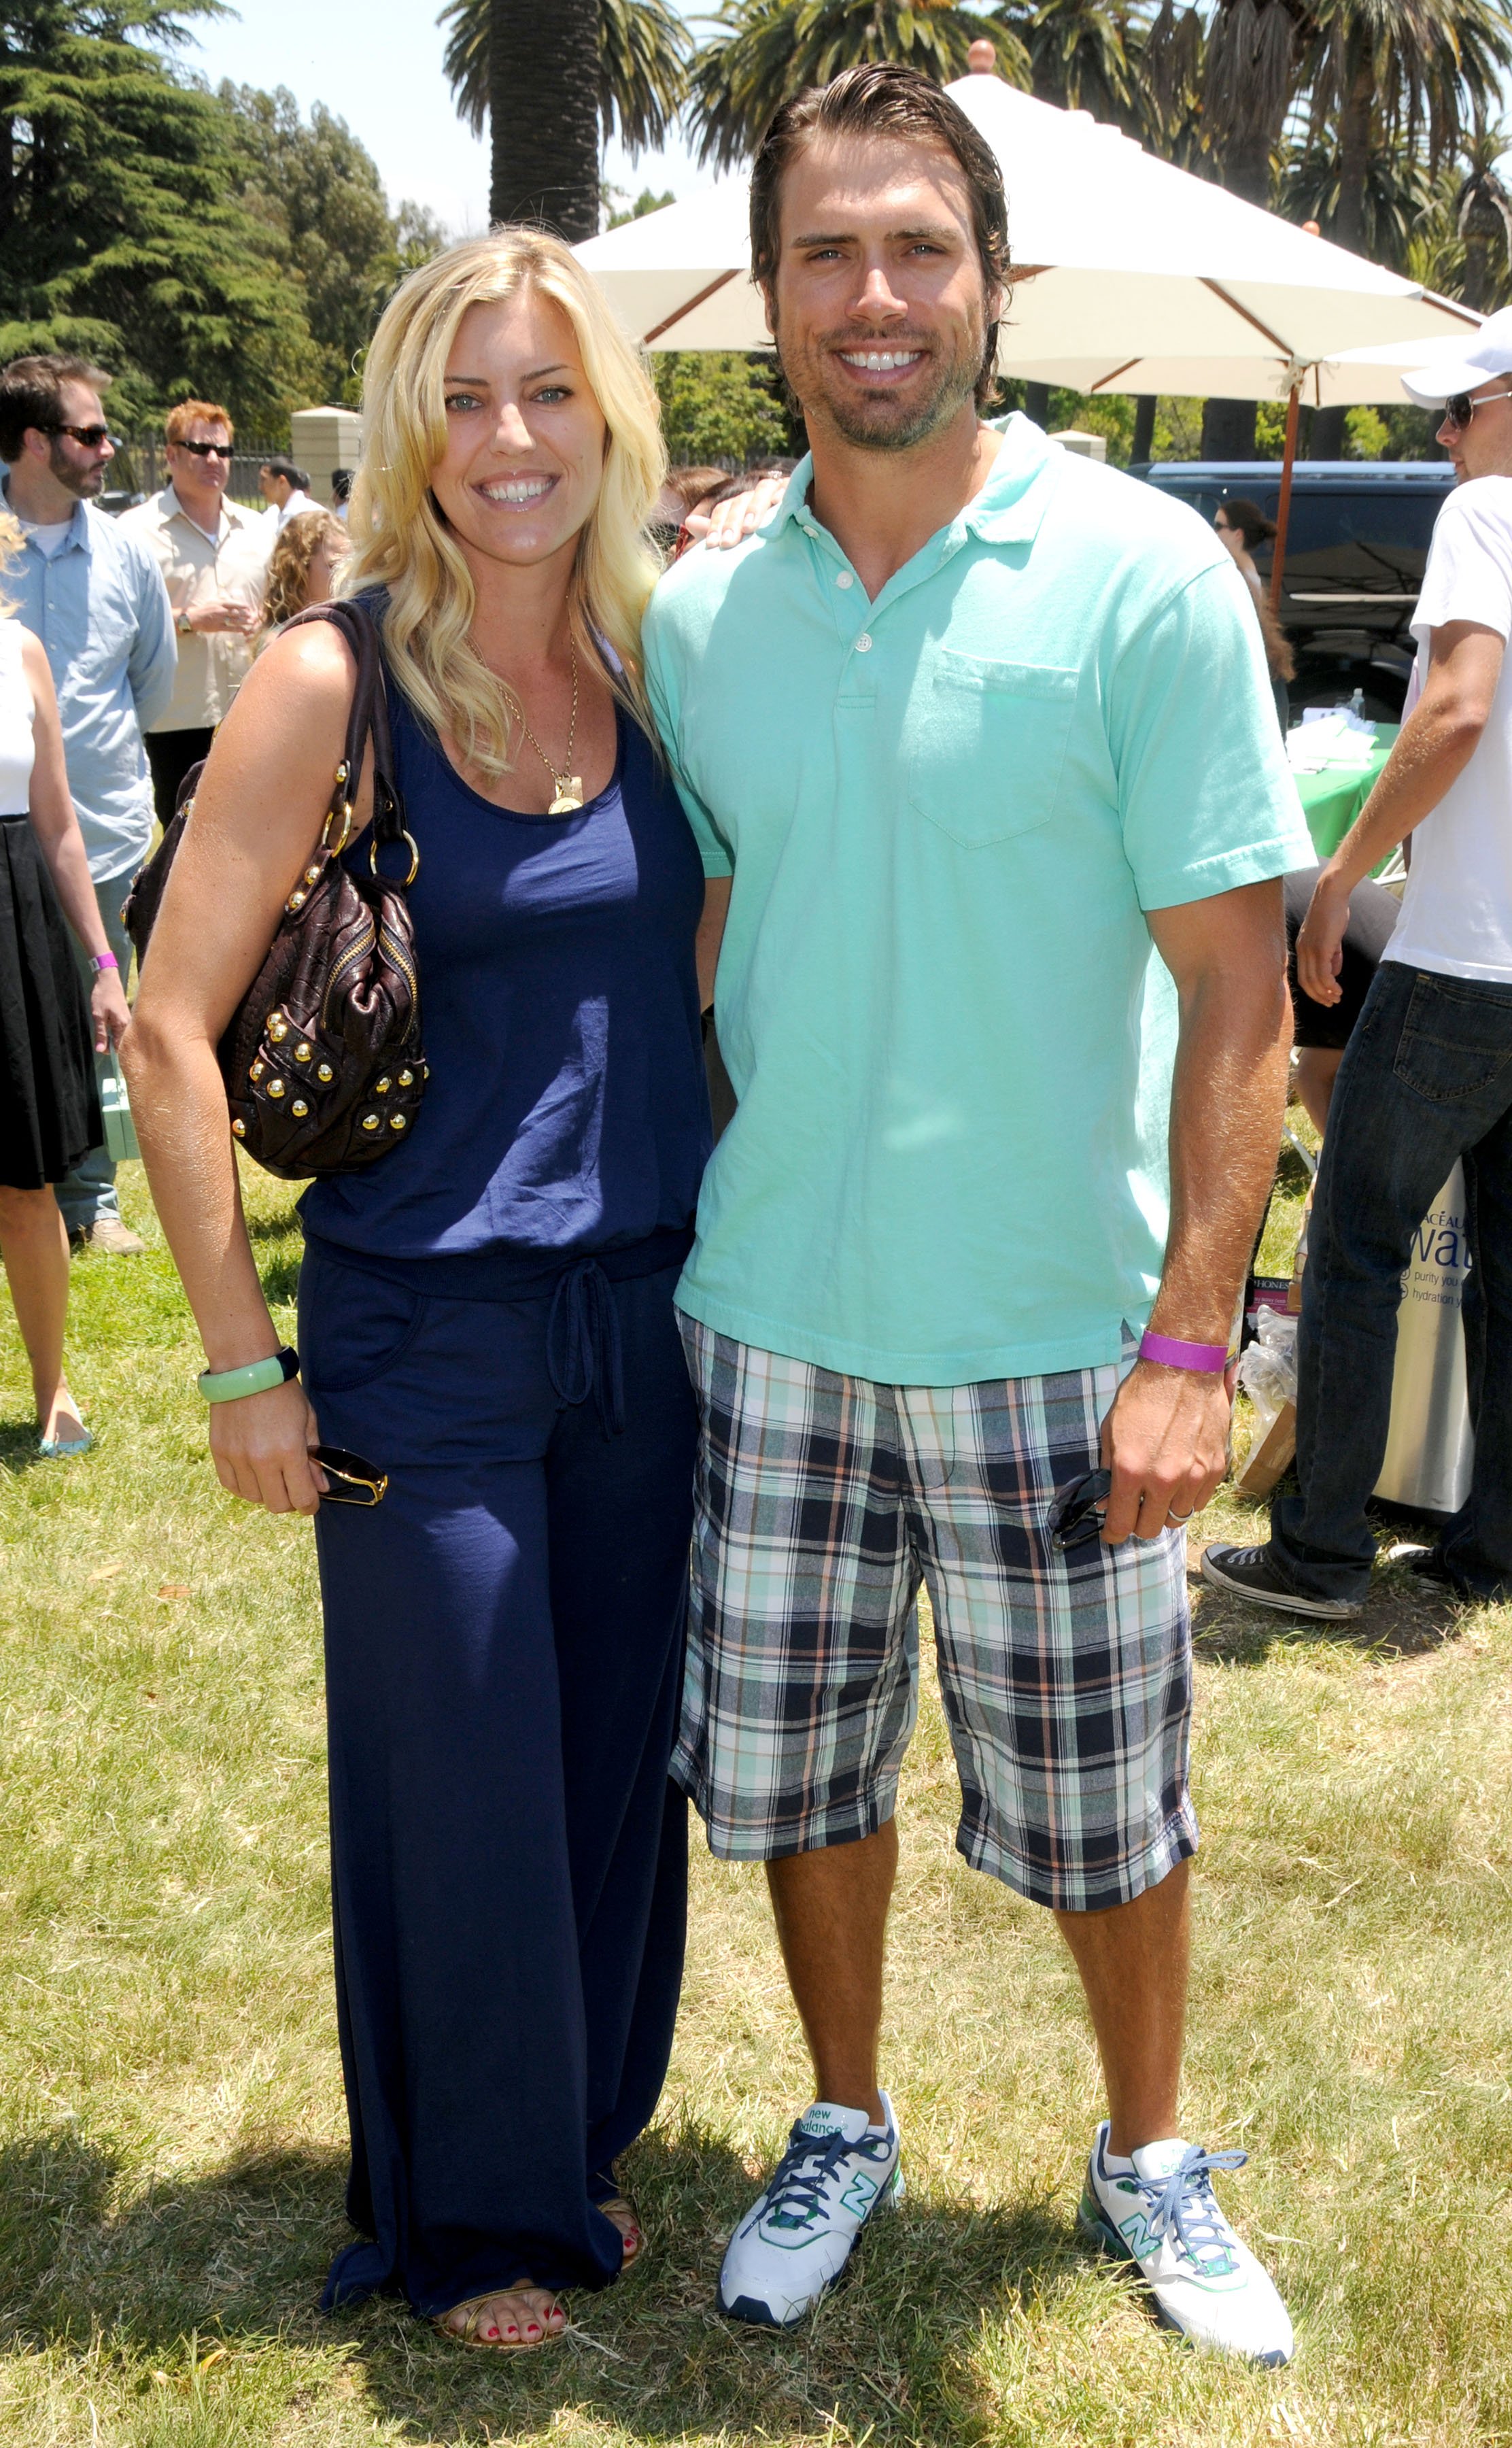 Joshua Morrow and wife Tobe Keeney arrive for the 20th Anniversary "A Time For Heroes" Celebrity Carnival Sponsored By The Elizabeth Glaser Pediatric AIDS Foundation at the Wadsworth Theater in Westwood, California on June 7, 2009. | Photo: Getty Images